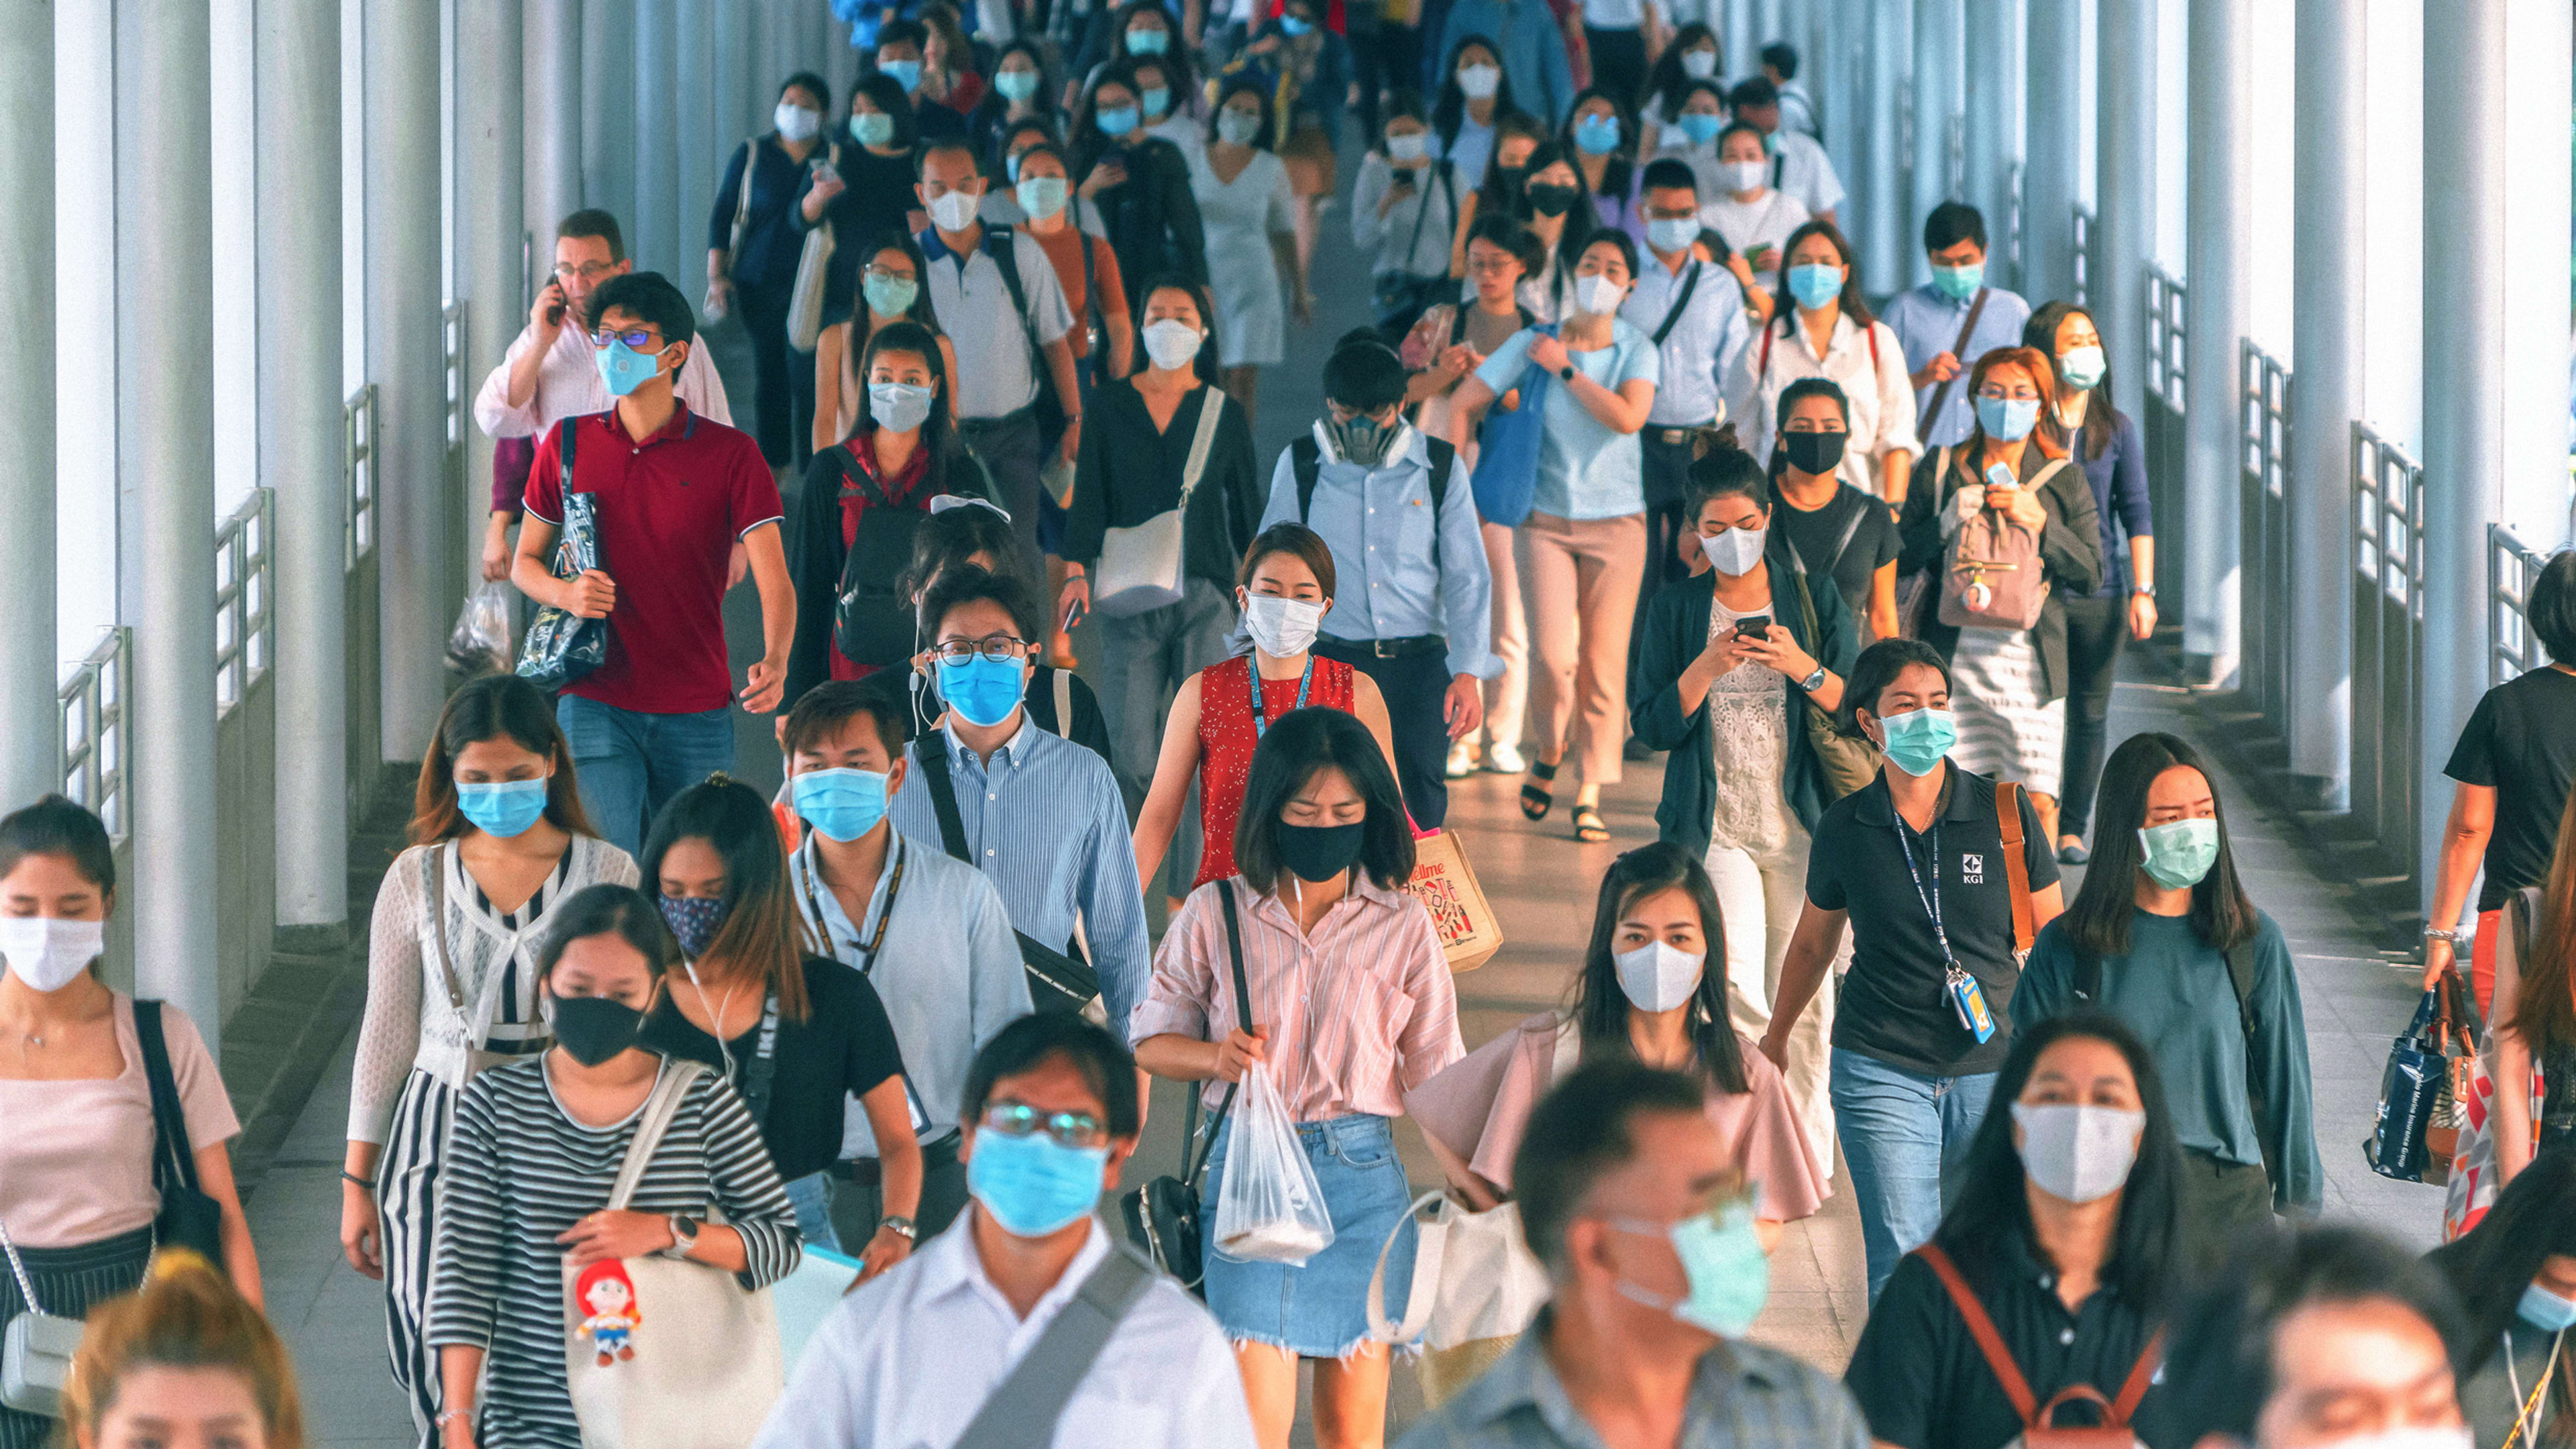 Countries where everyone wore masks saw COVID death rates 100 times lower than projected